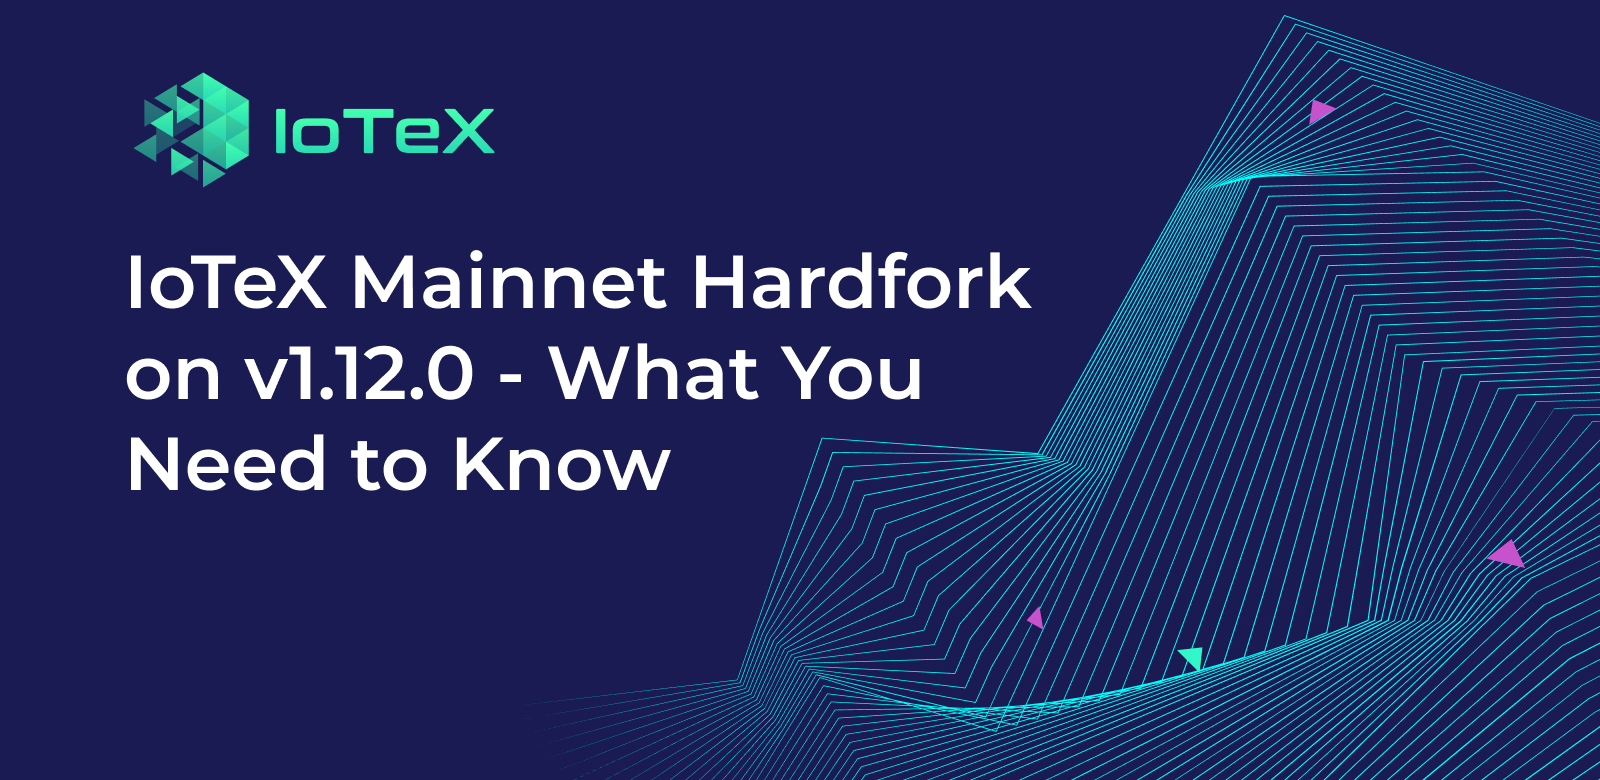 IoTeX Mainnet Hardfork on v1.12.0 - What You Need to Know